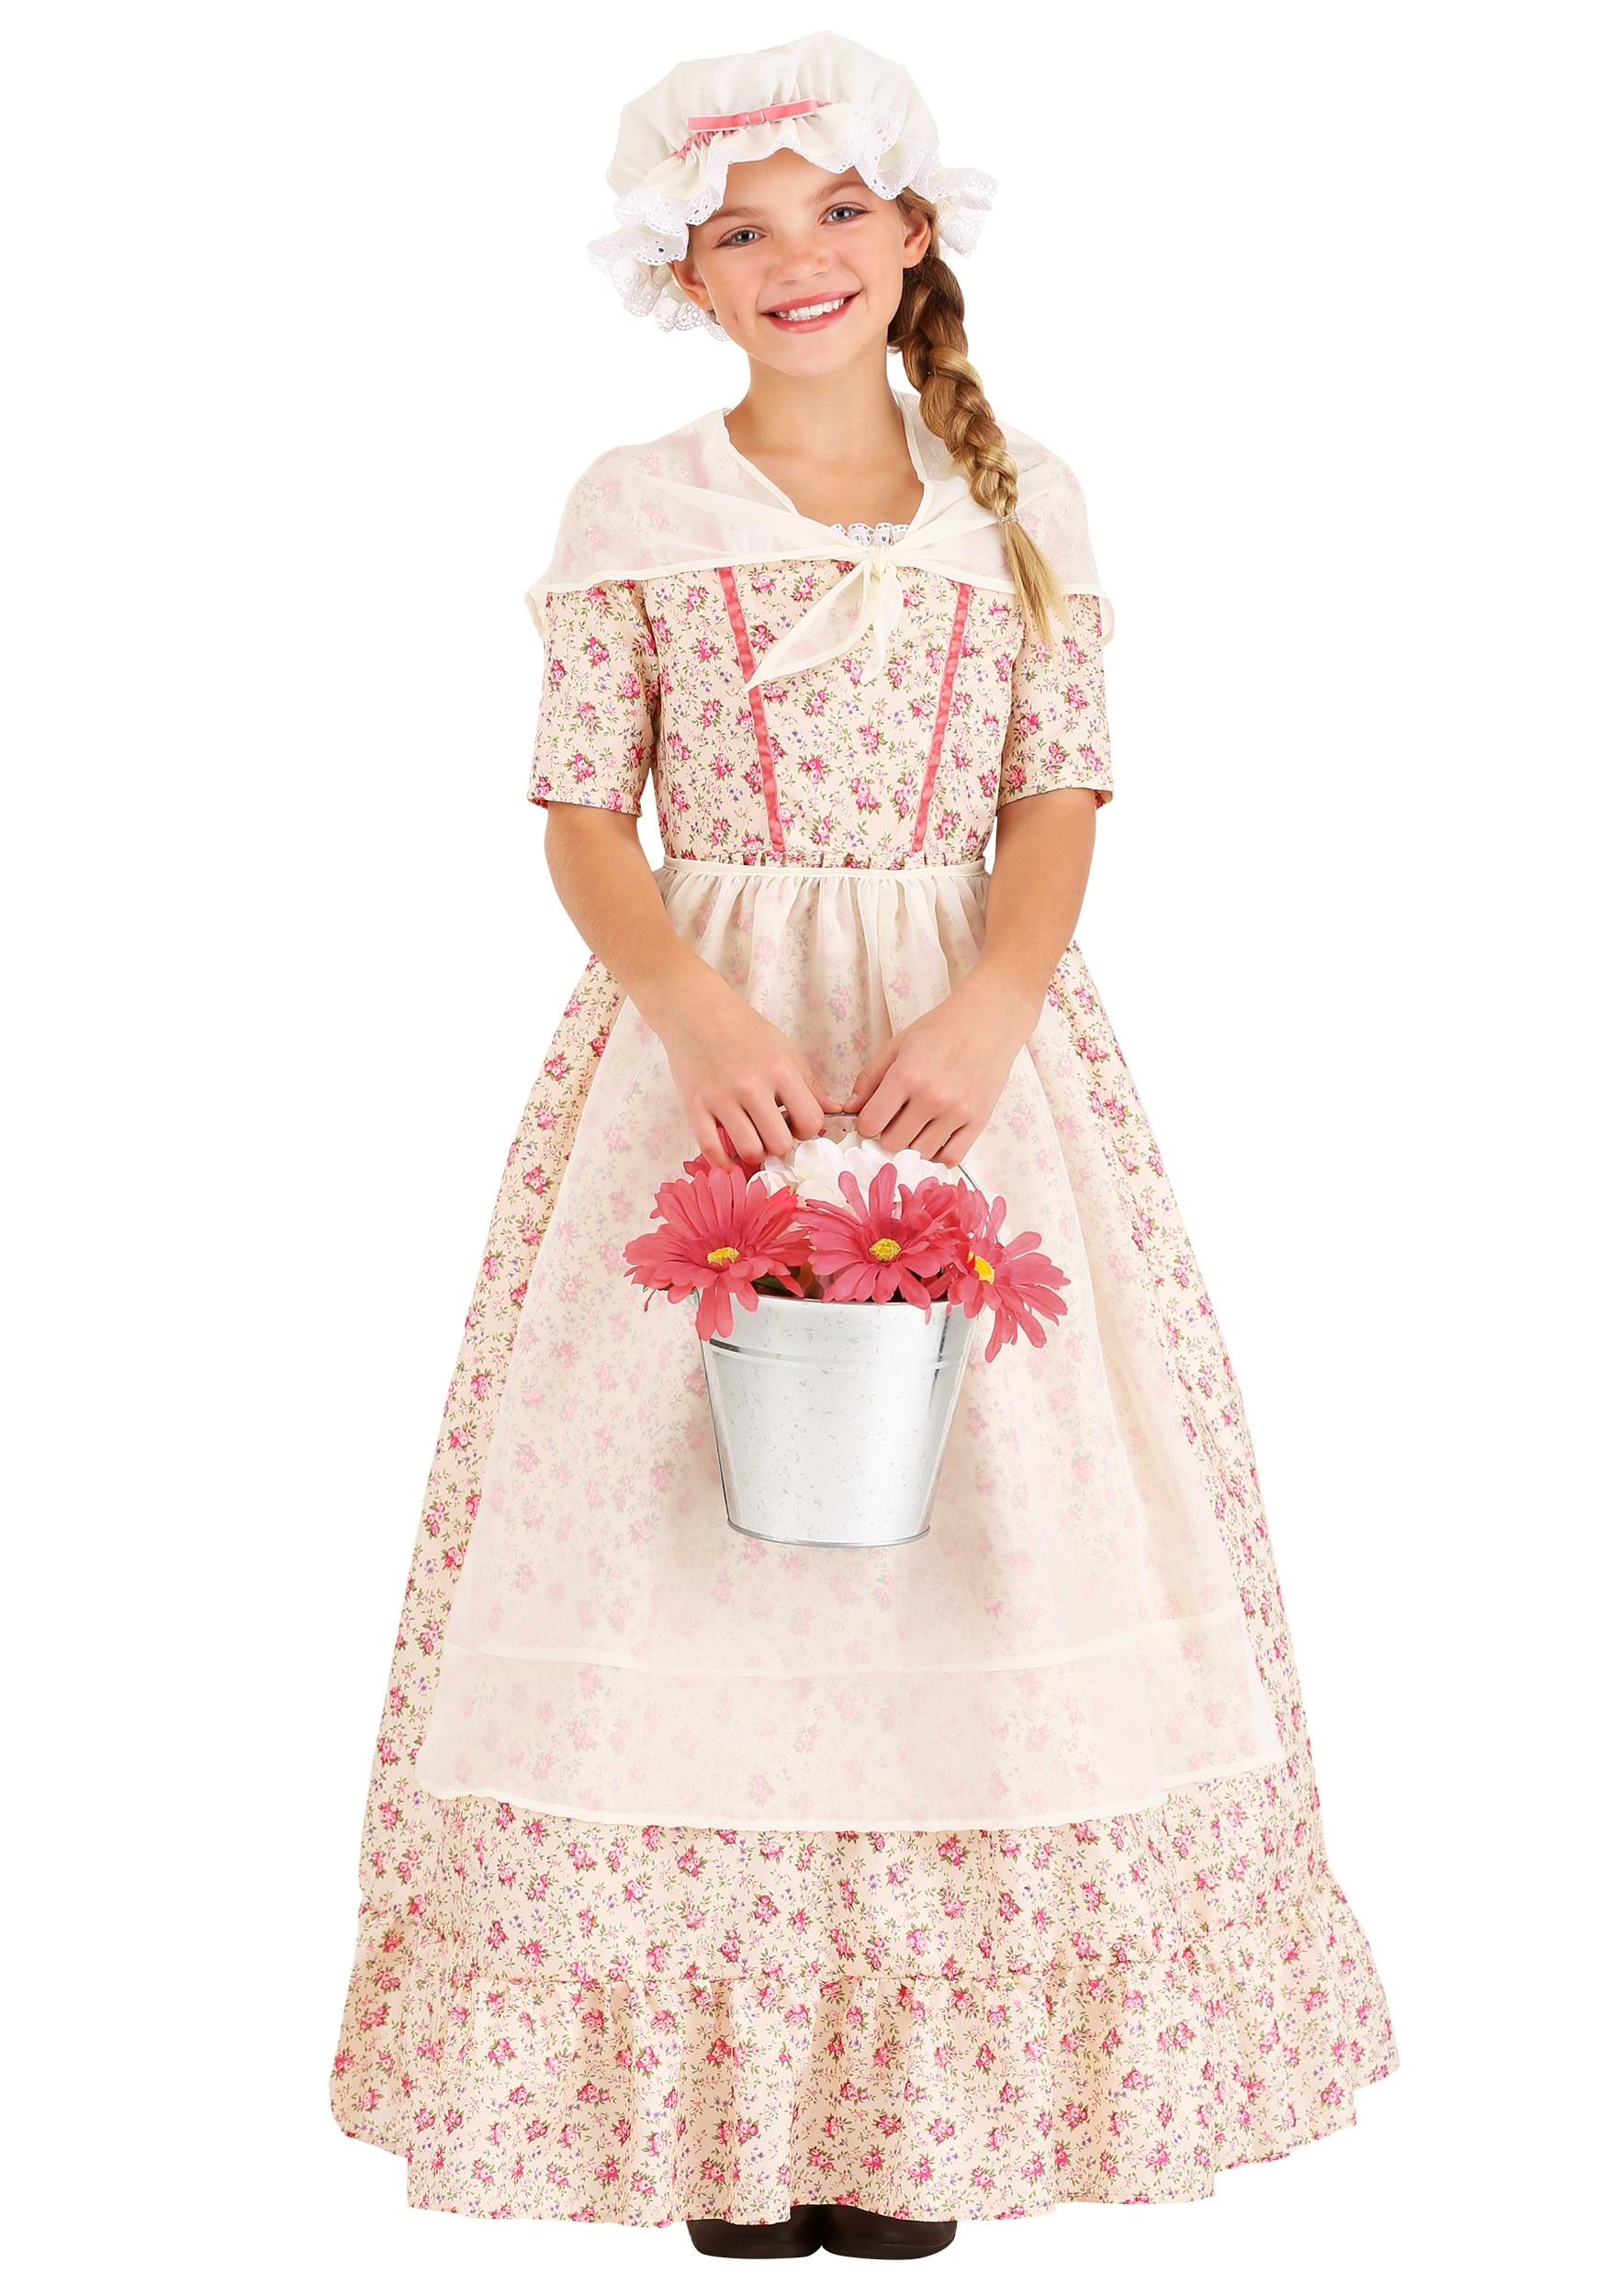 Kid’s Colonial Girl Costume